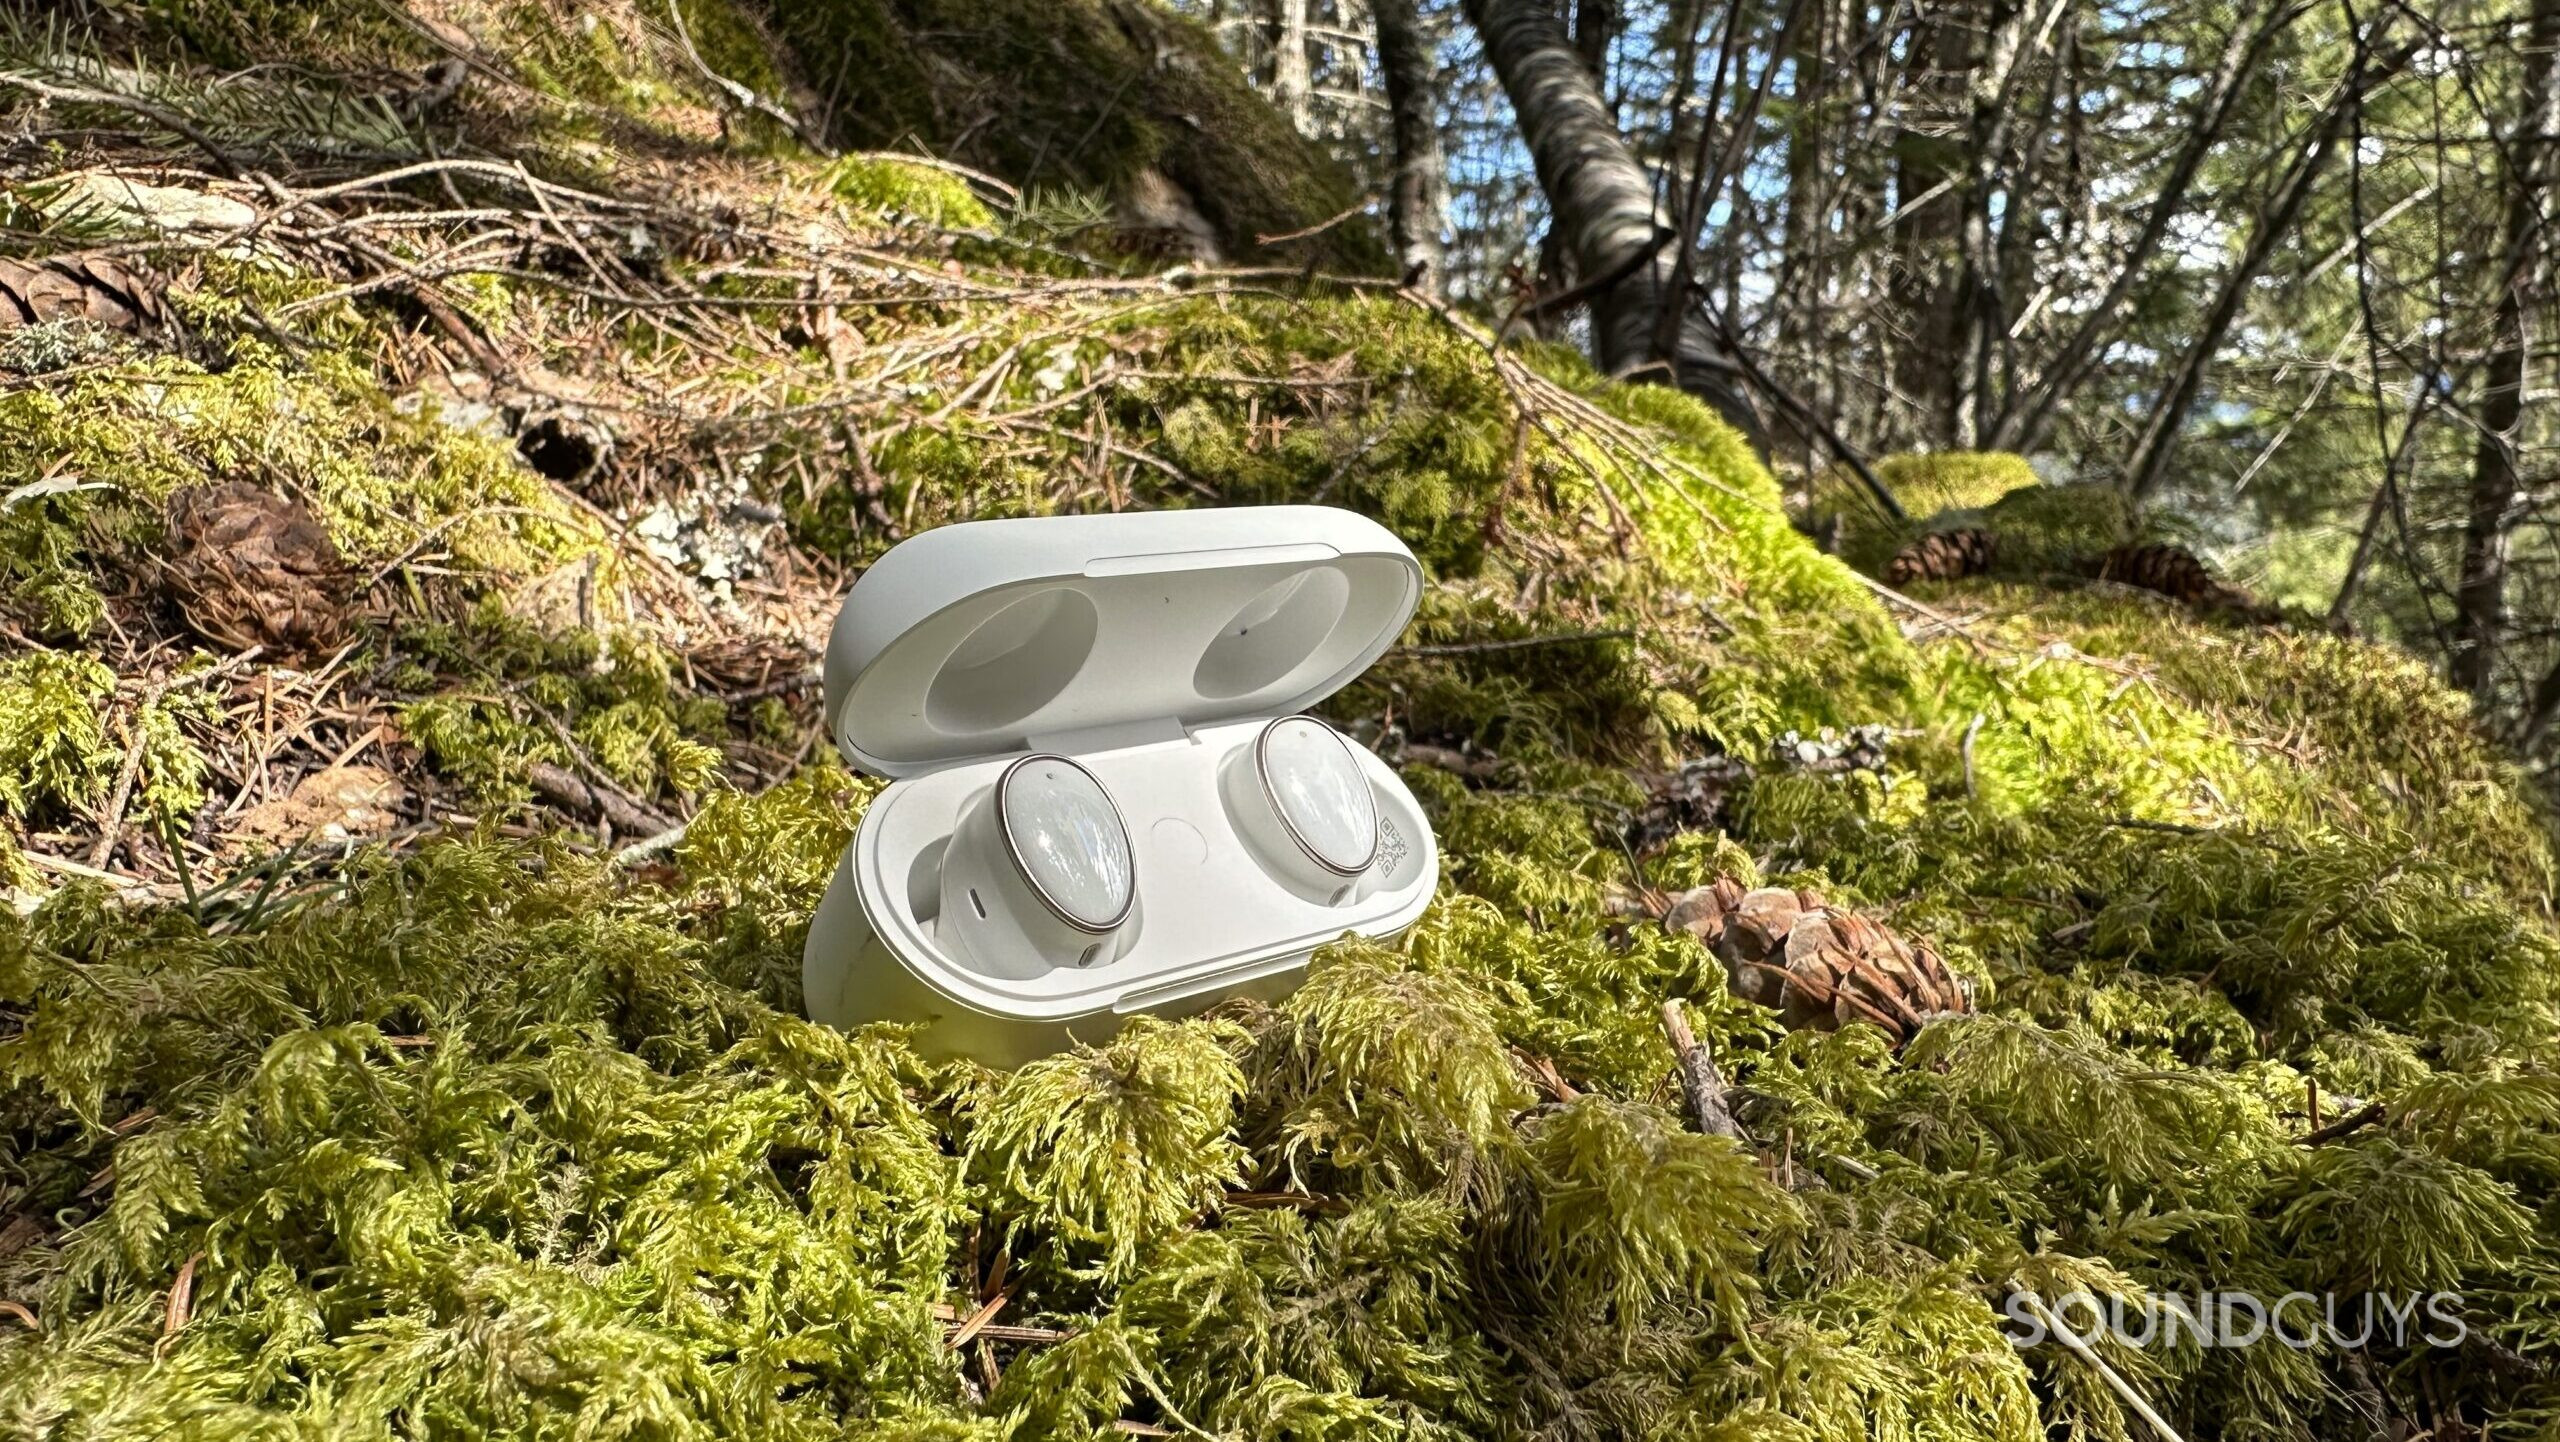 A pair of 1MORE Evo earbuds in their case on a mossy rock.